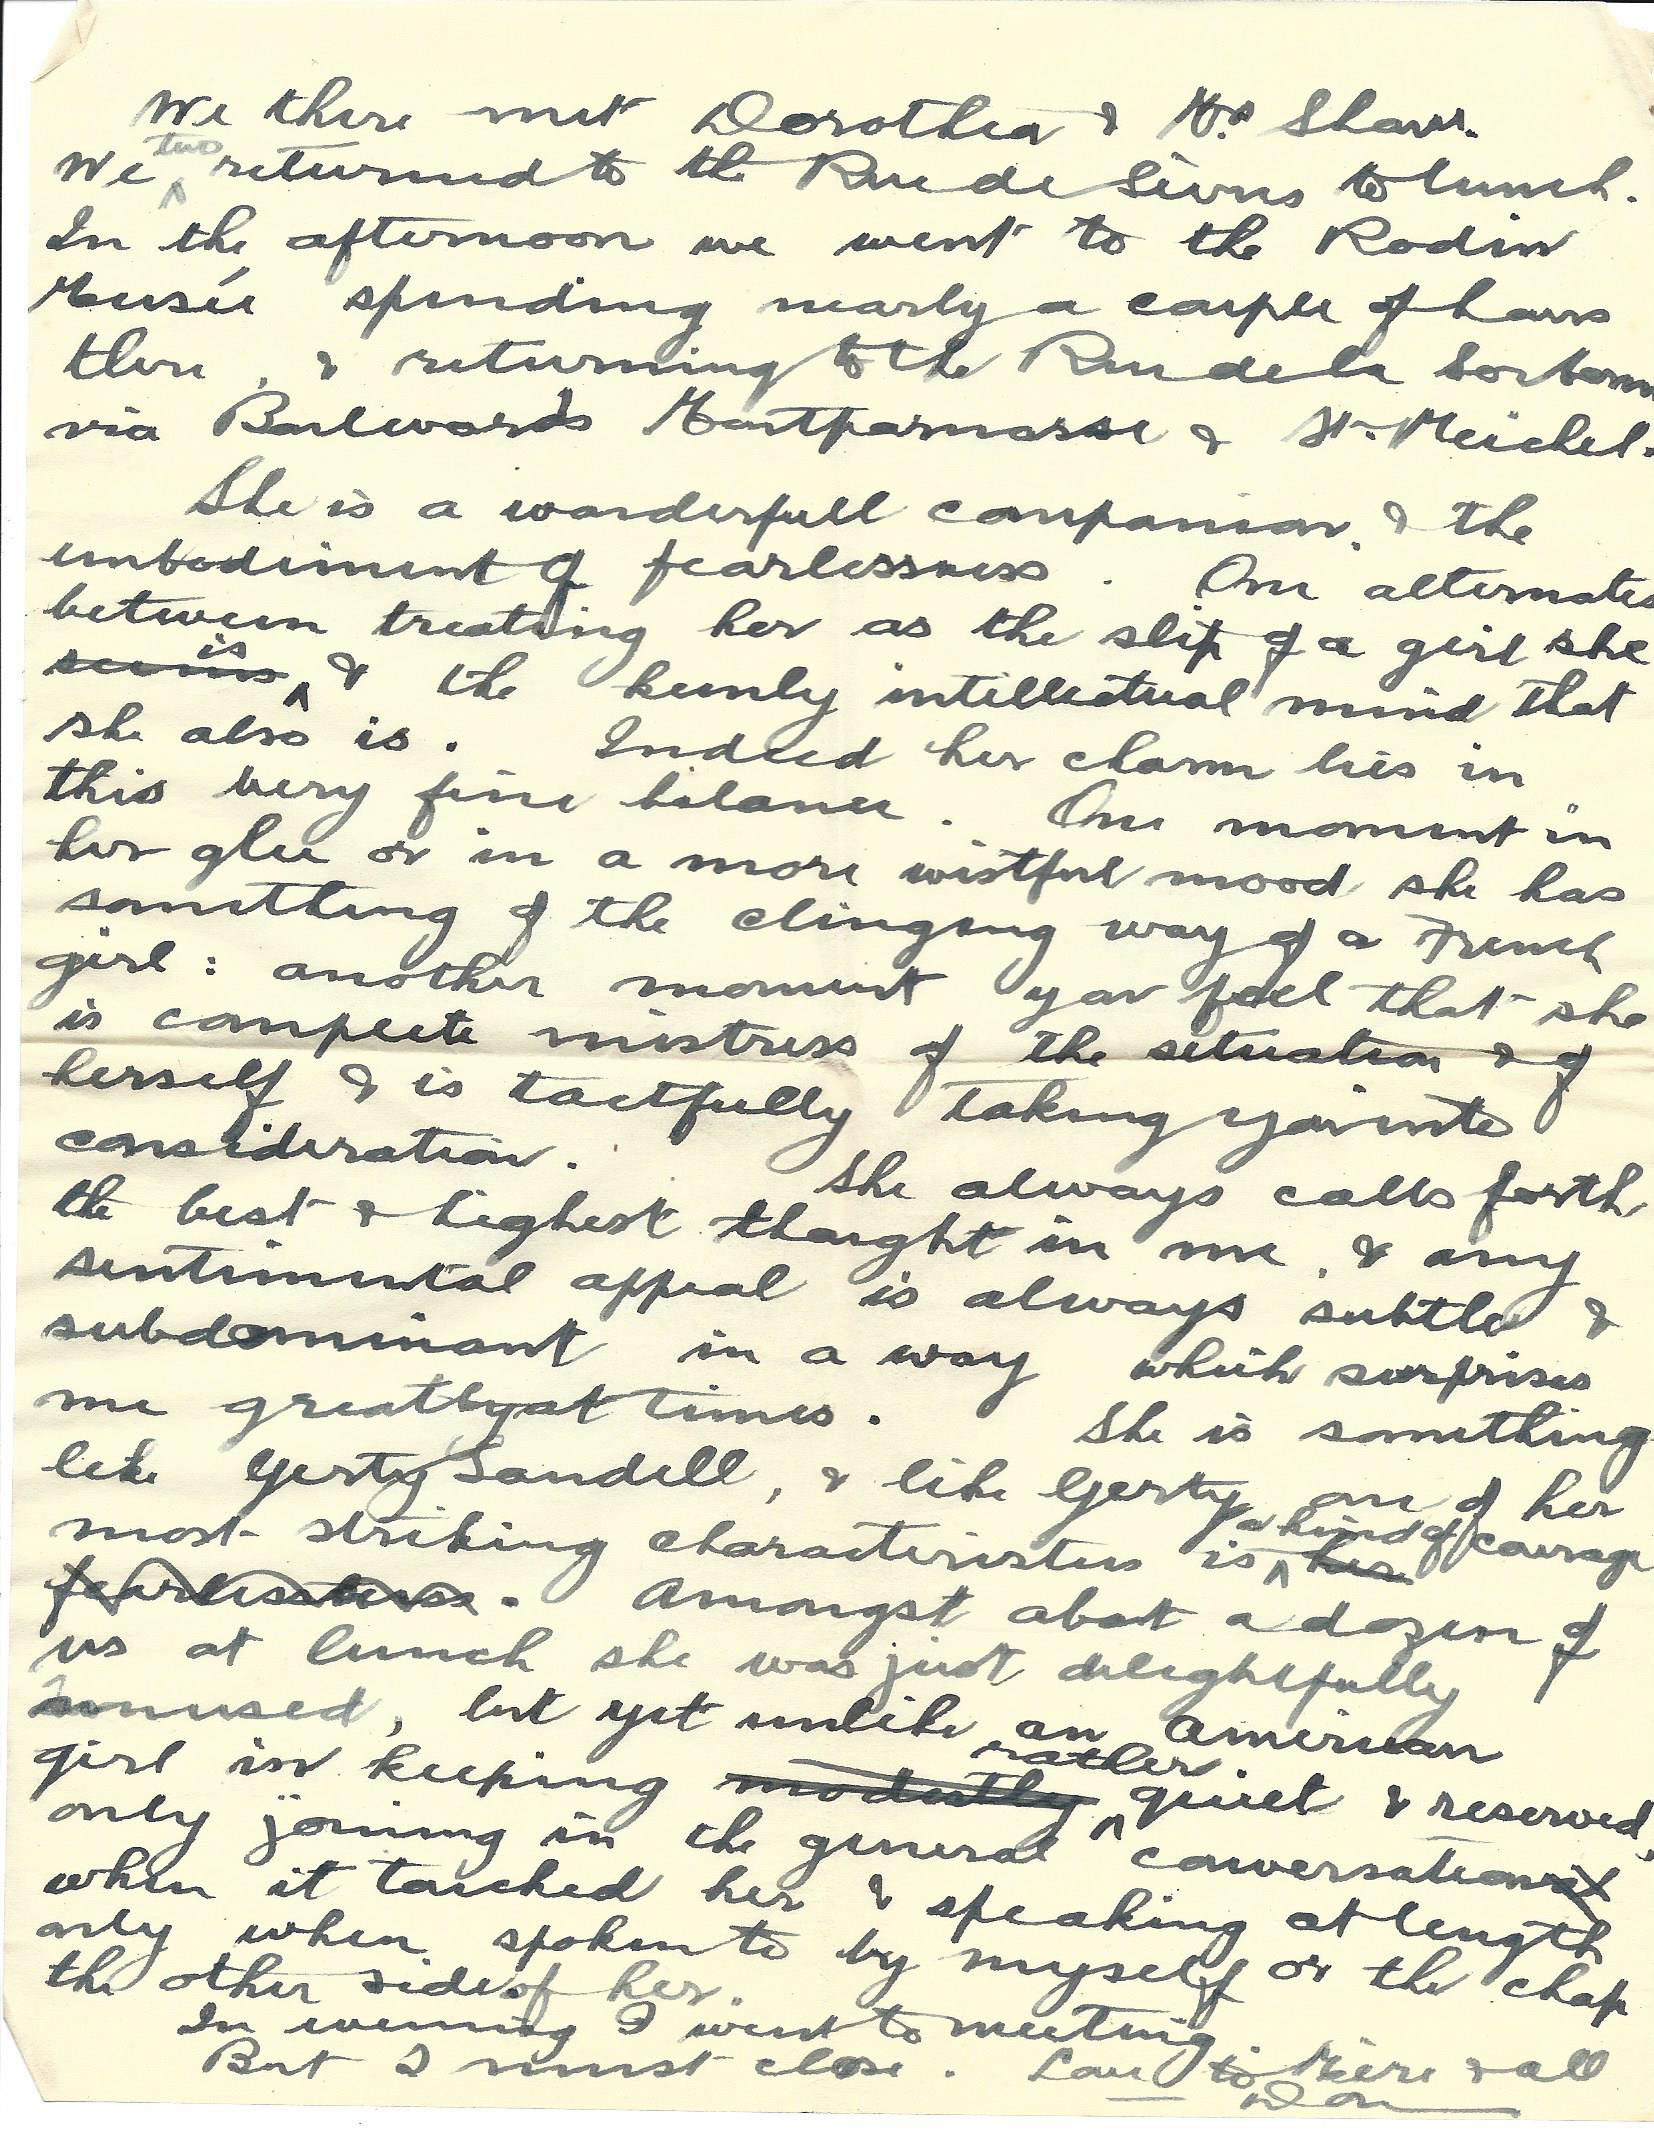 1920-03-08 p3 Donald Bearman letter to his father